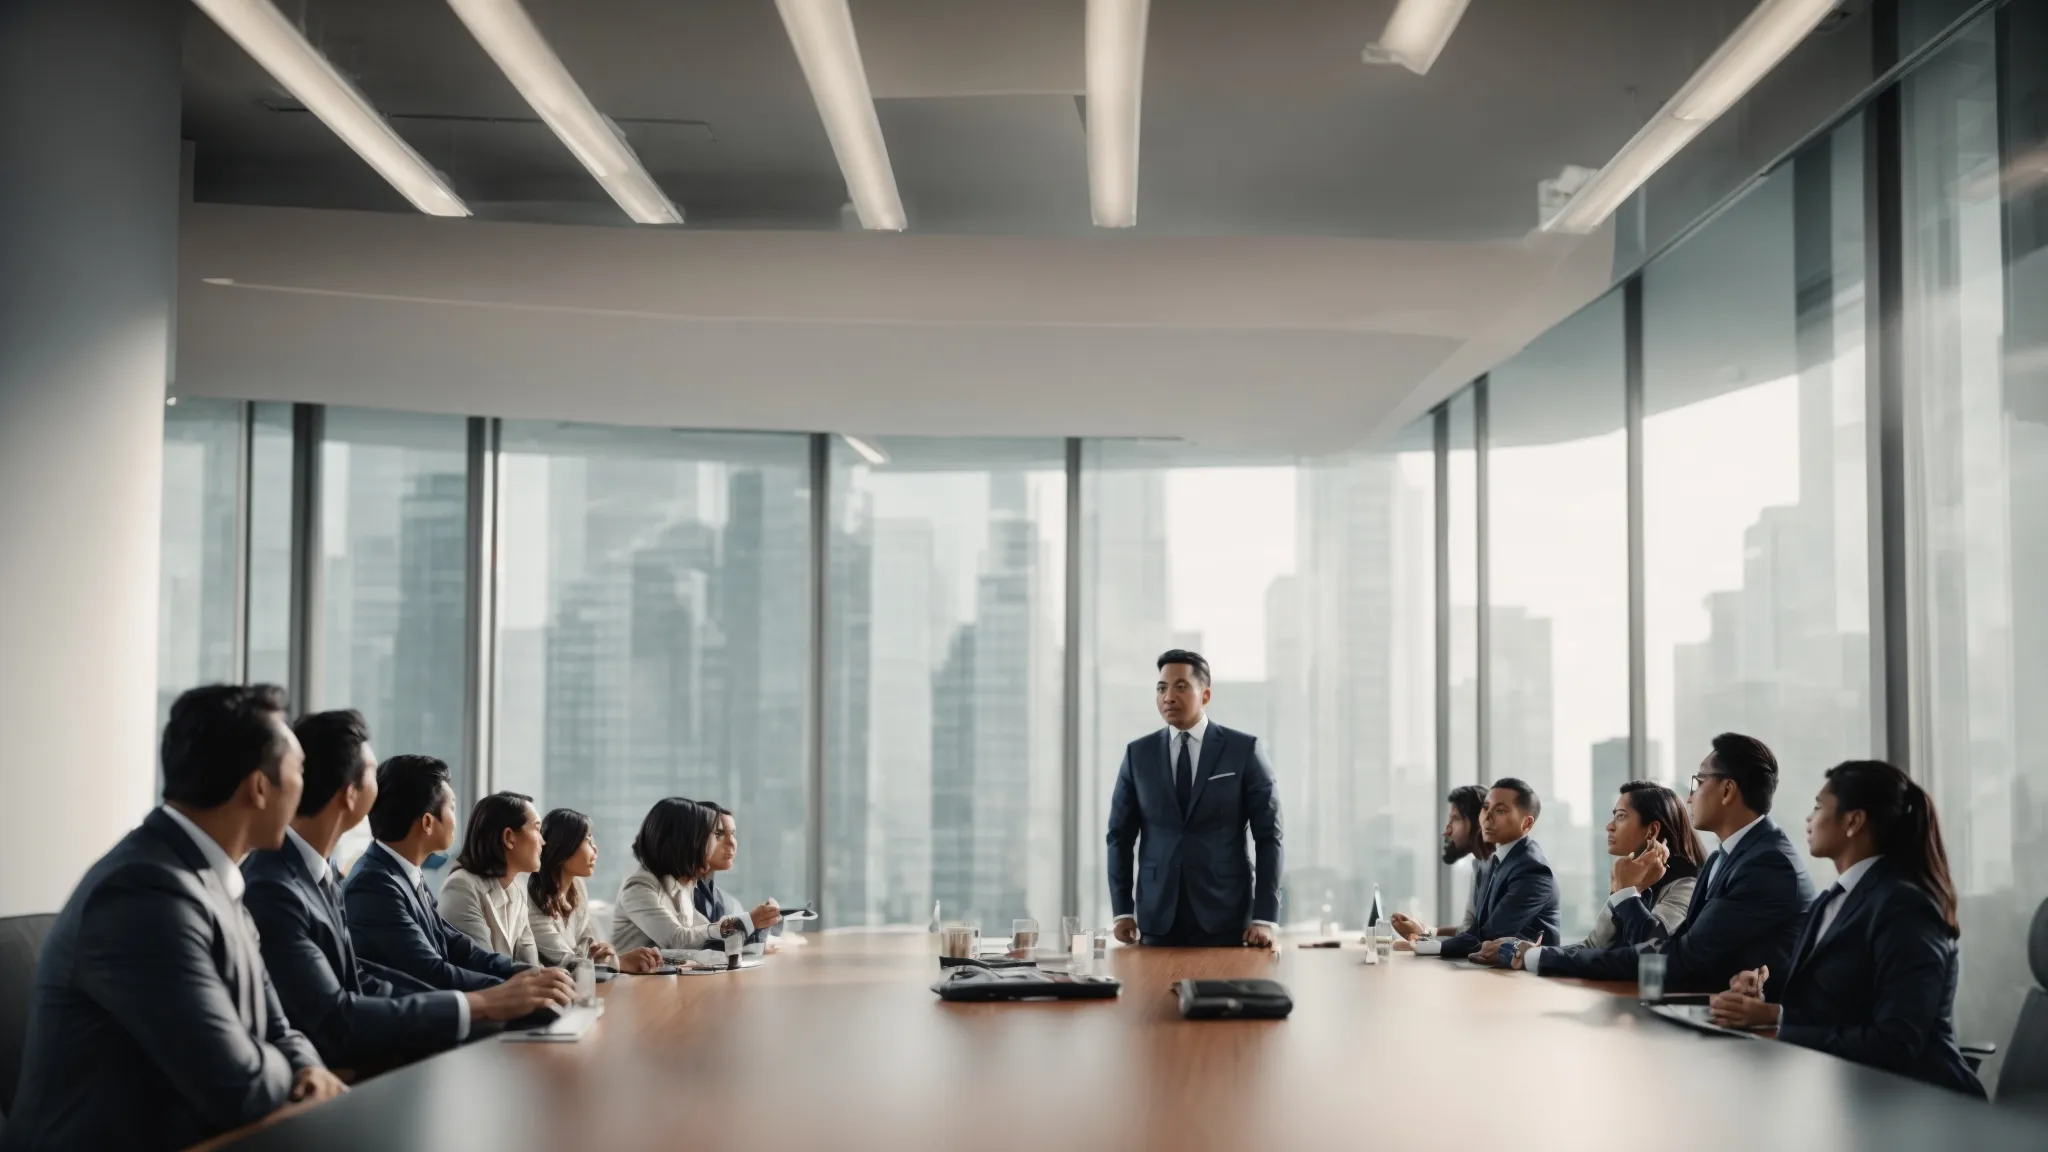 a ceo stands confidently at the helm of a meeting table, presenting a financial strategy to potential investors in a bright, modern office.